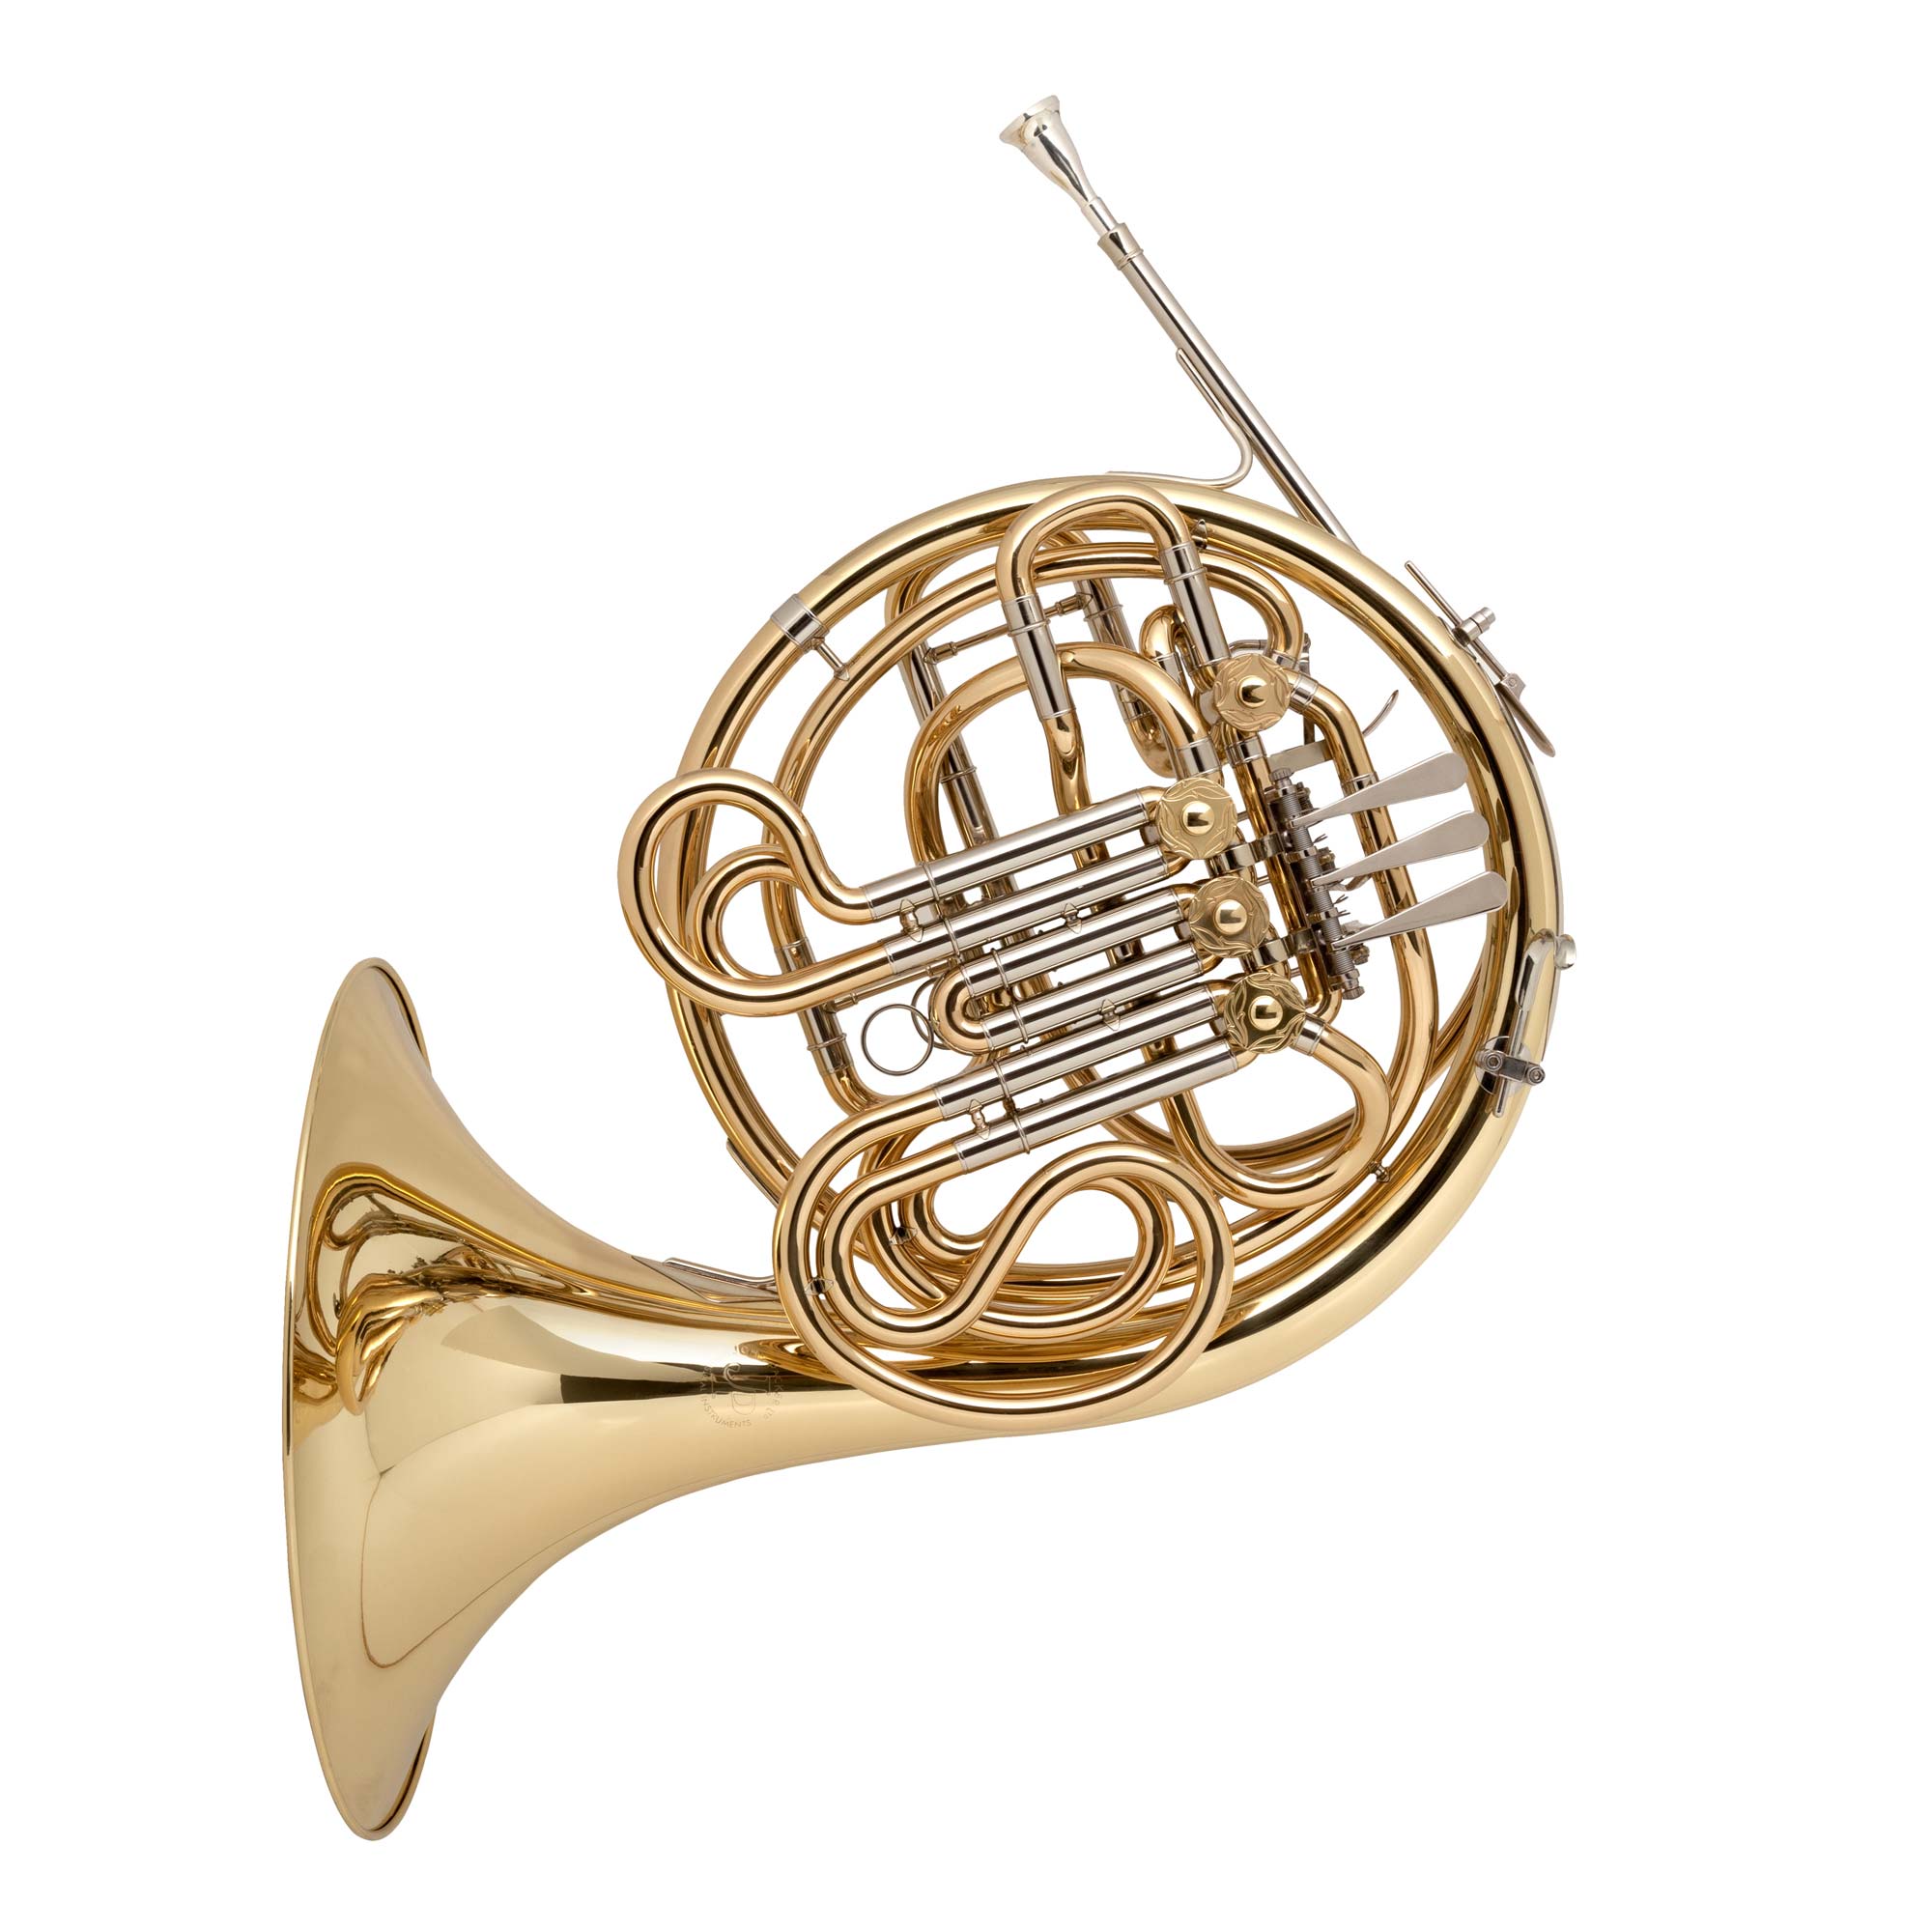 French Horns - TAYLORMADE MUSIC AUSTRALIA